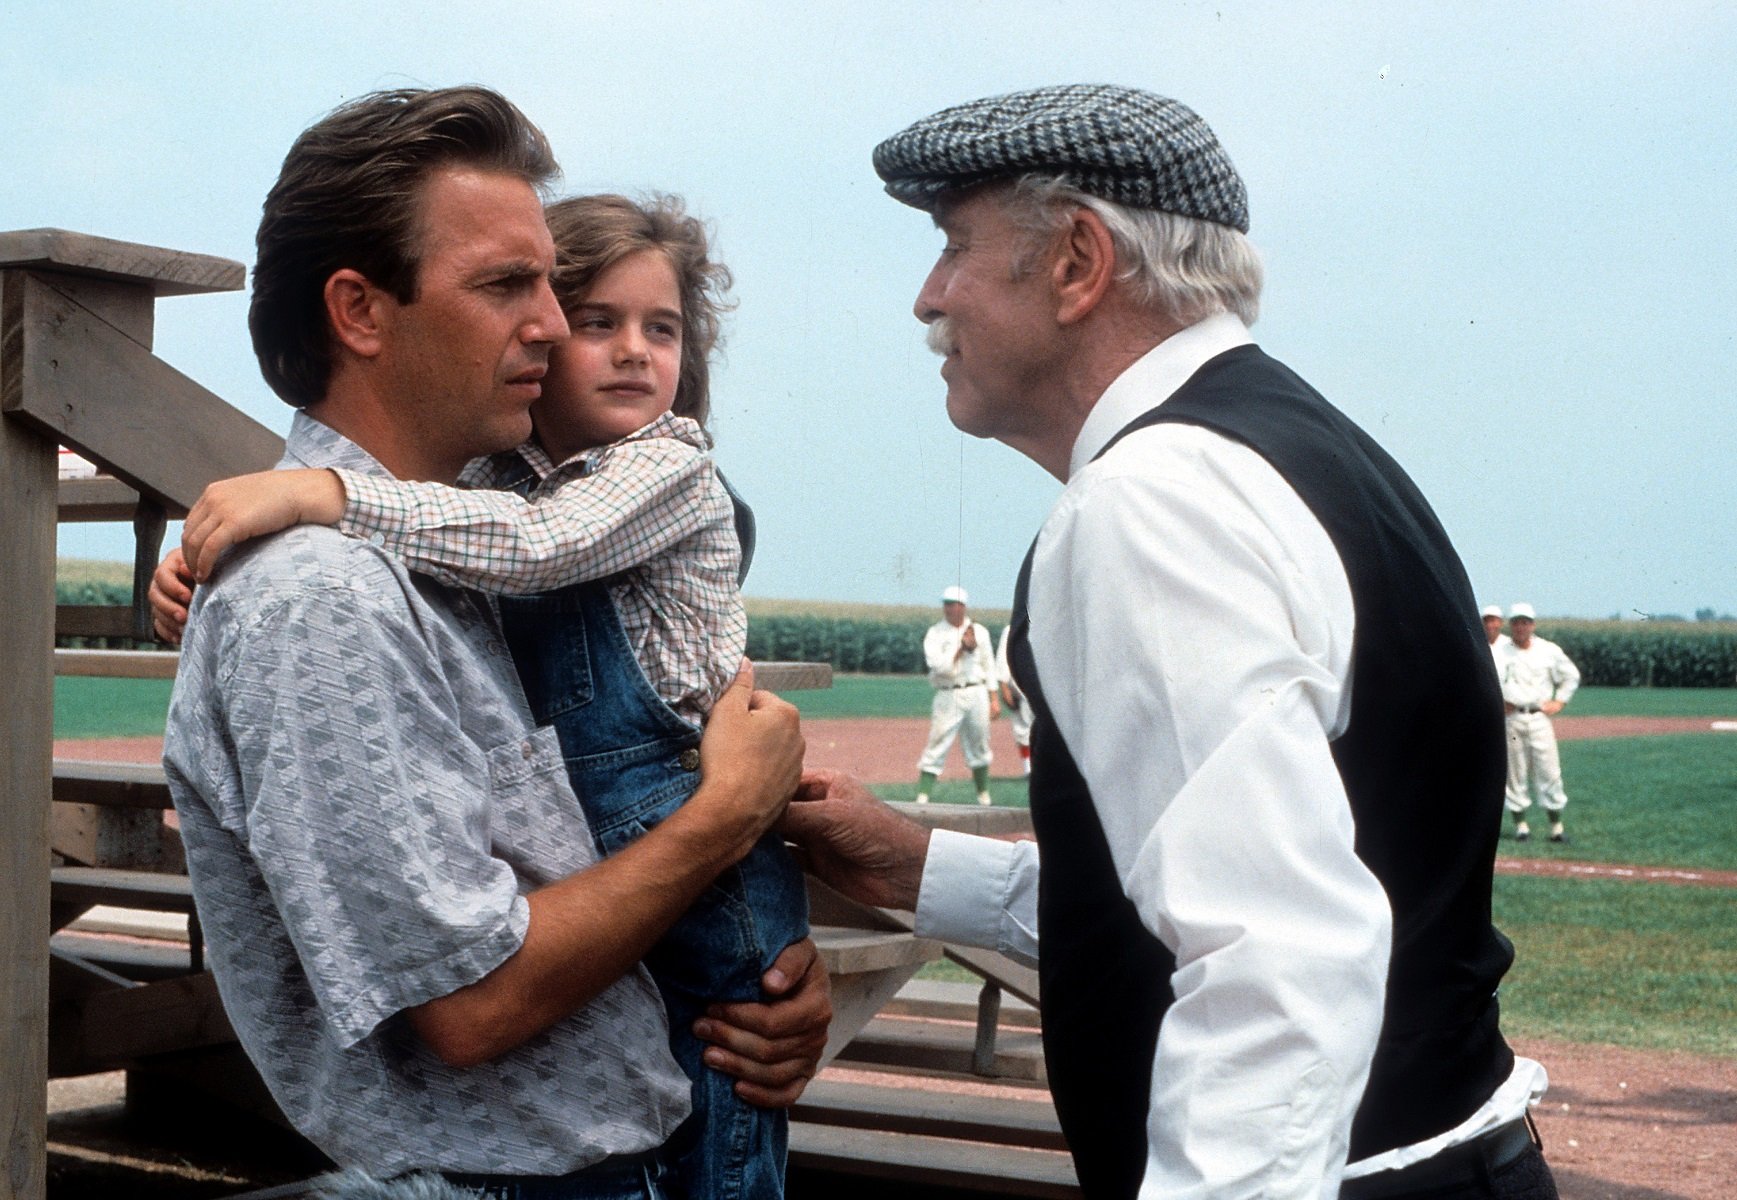 Kevin Costner holds Gaby Hoffmann while talking to Burt Lancaster in front of the field in 'Field of Dreams' in 1989